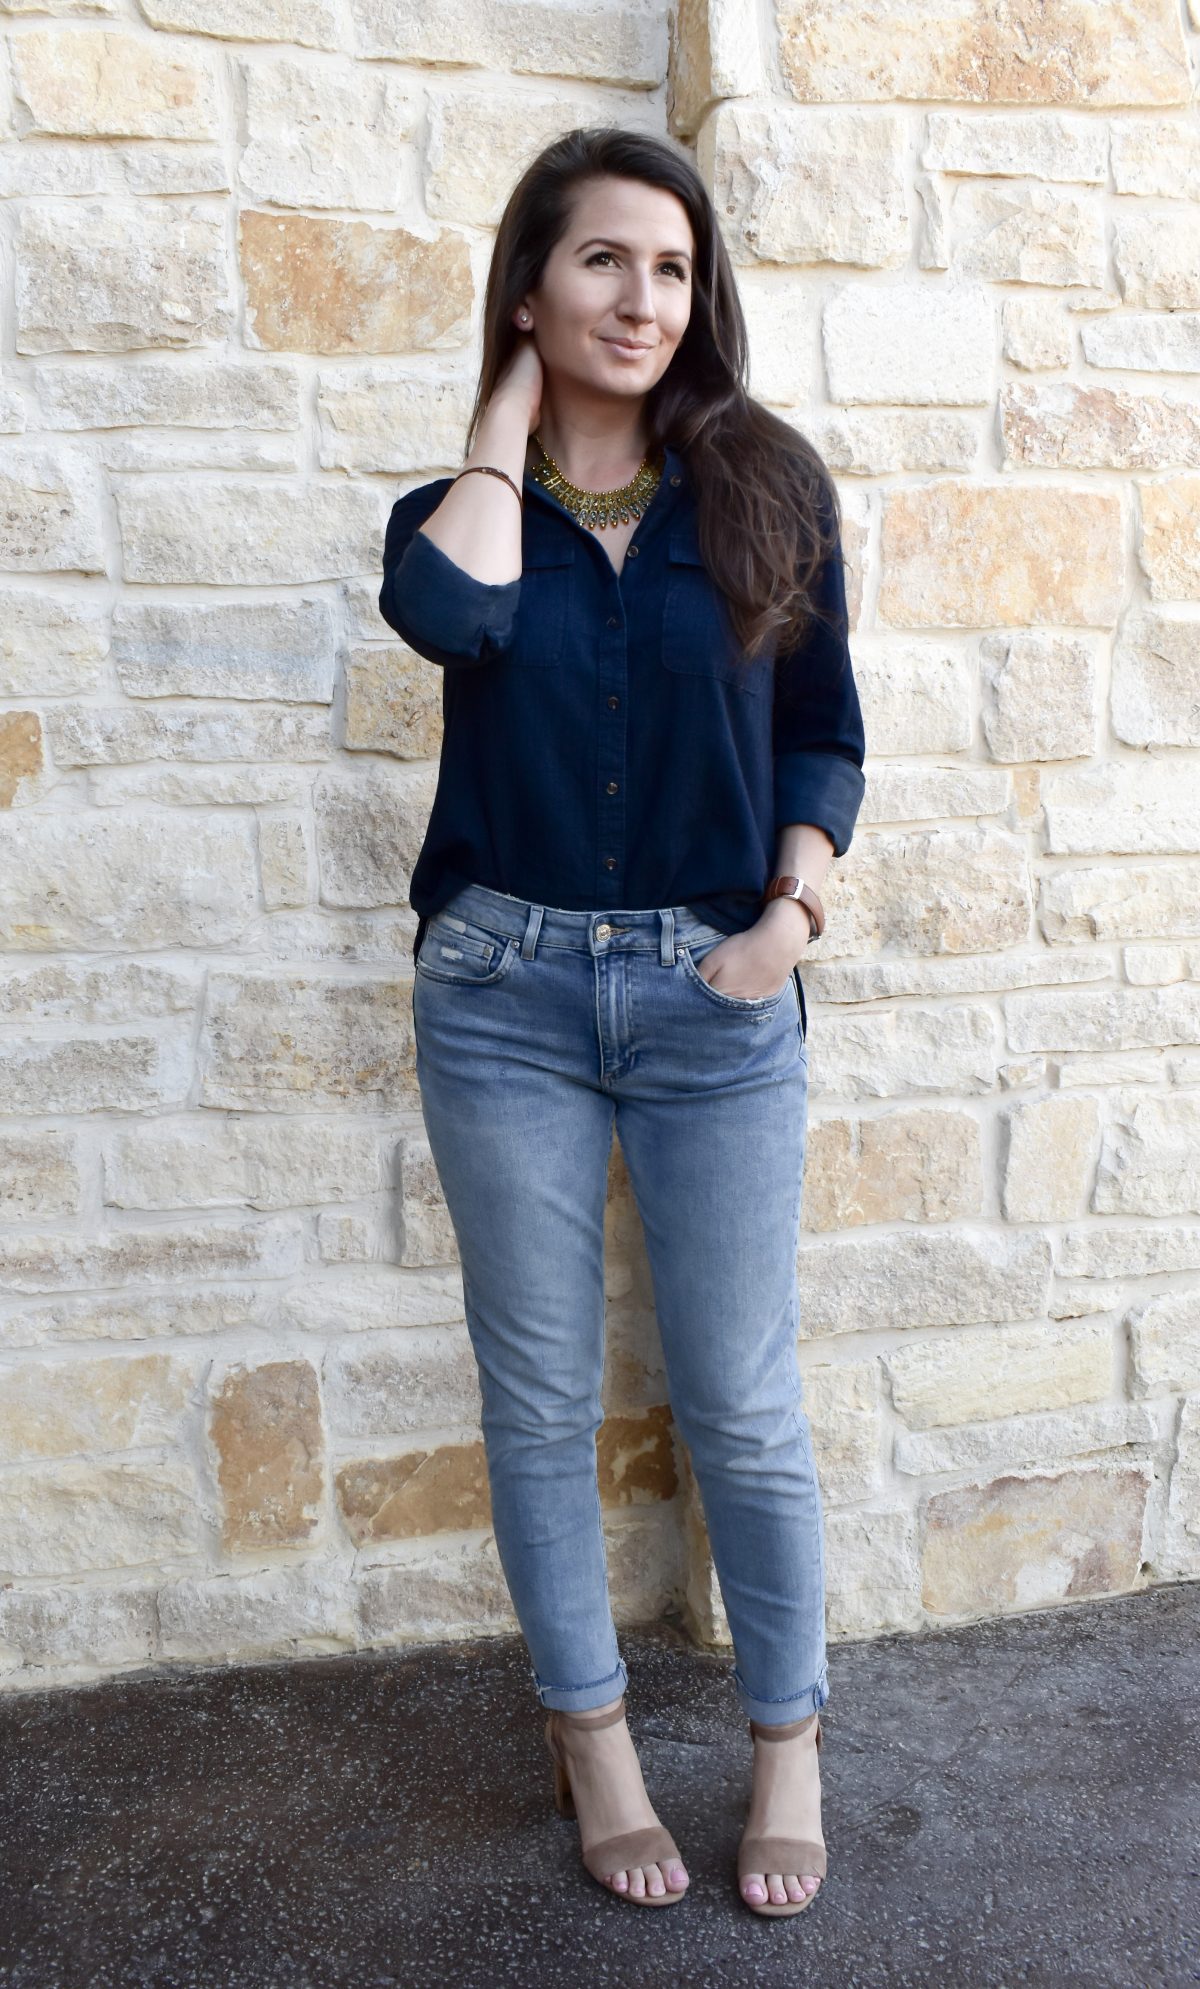 5 Easy Tips for Wearing Denim on Denim Without Looking Crazy